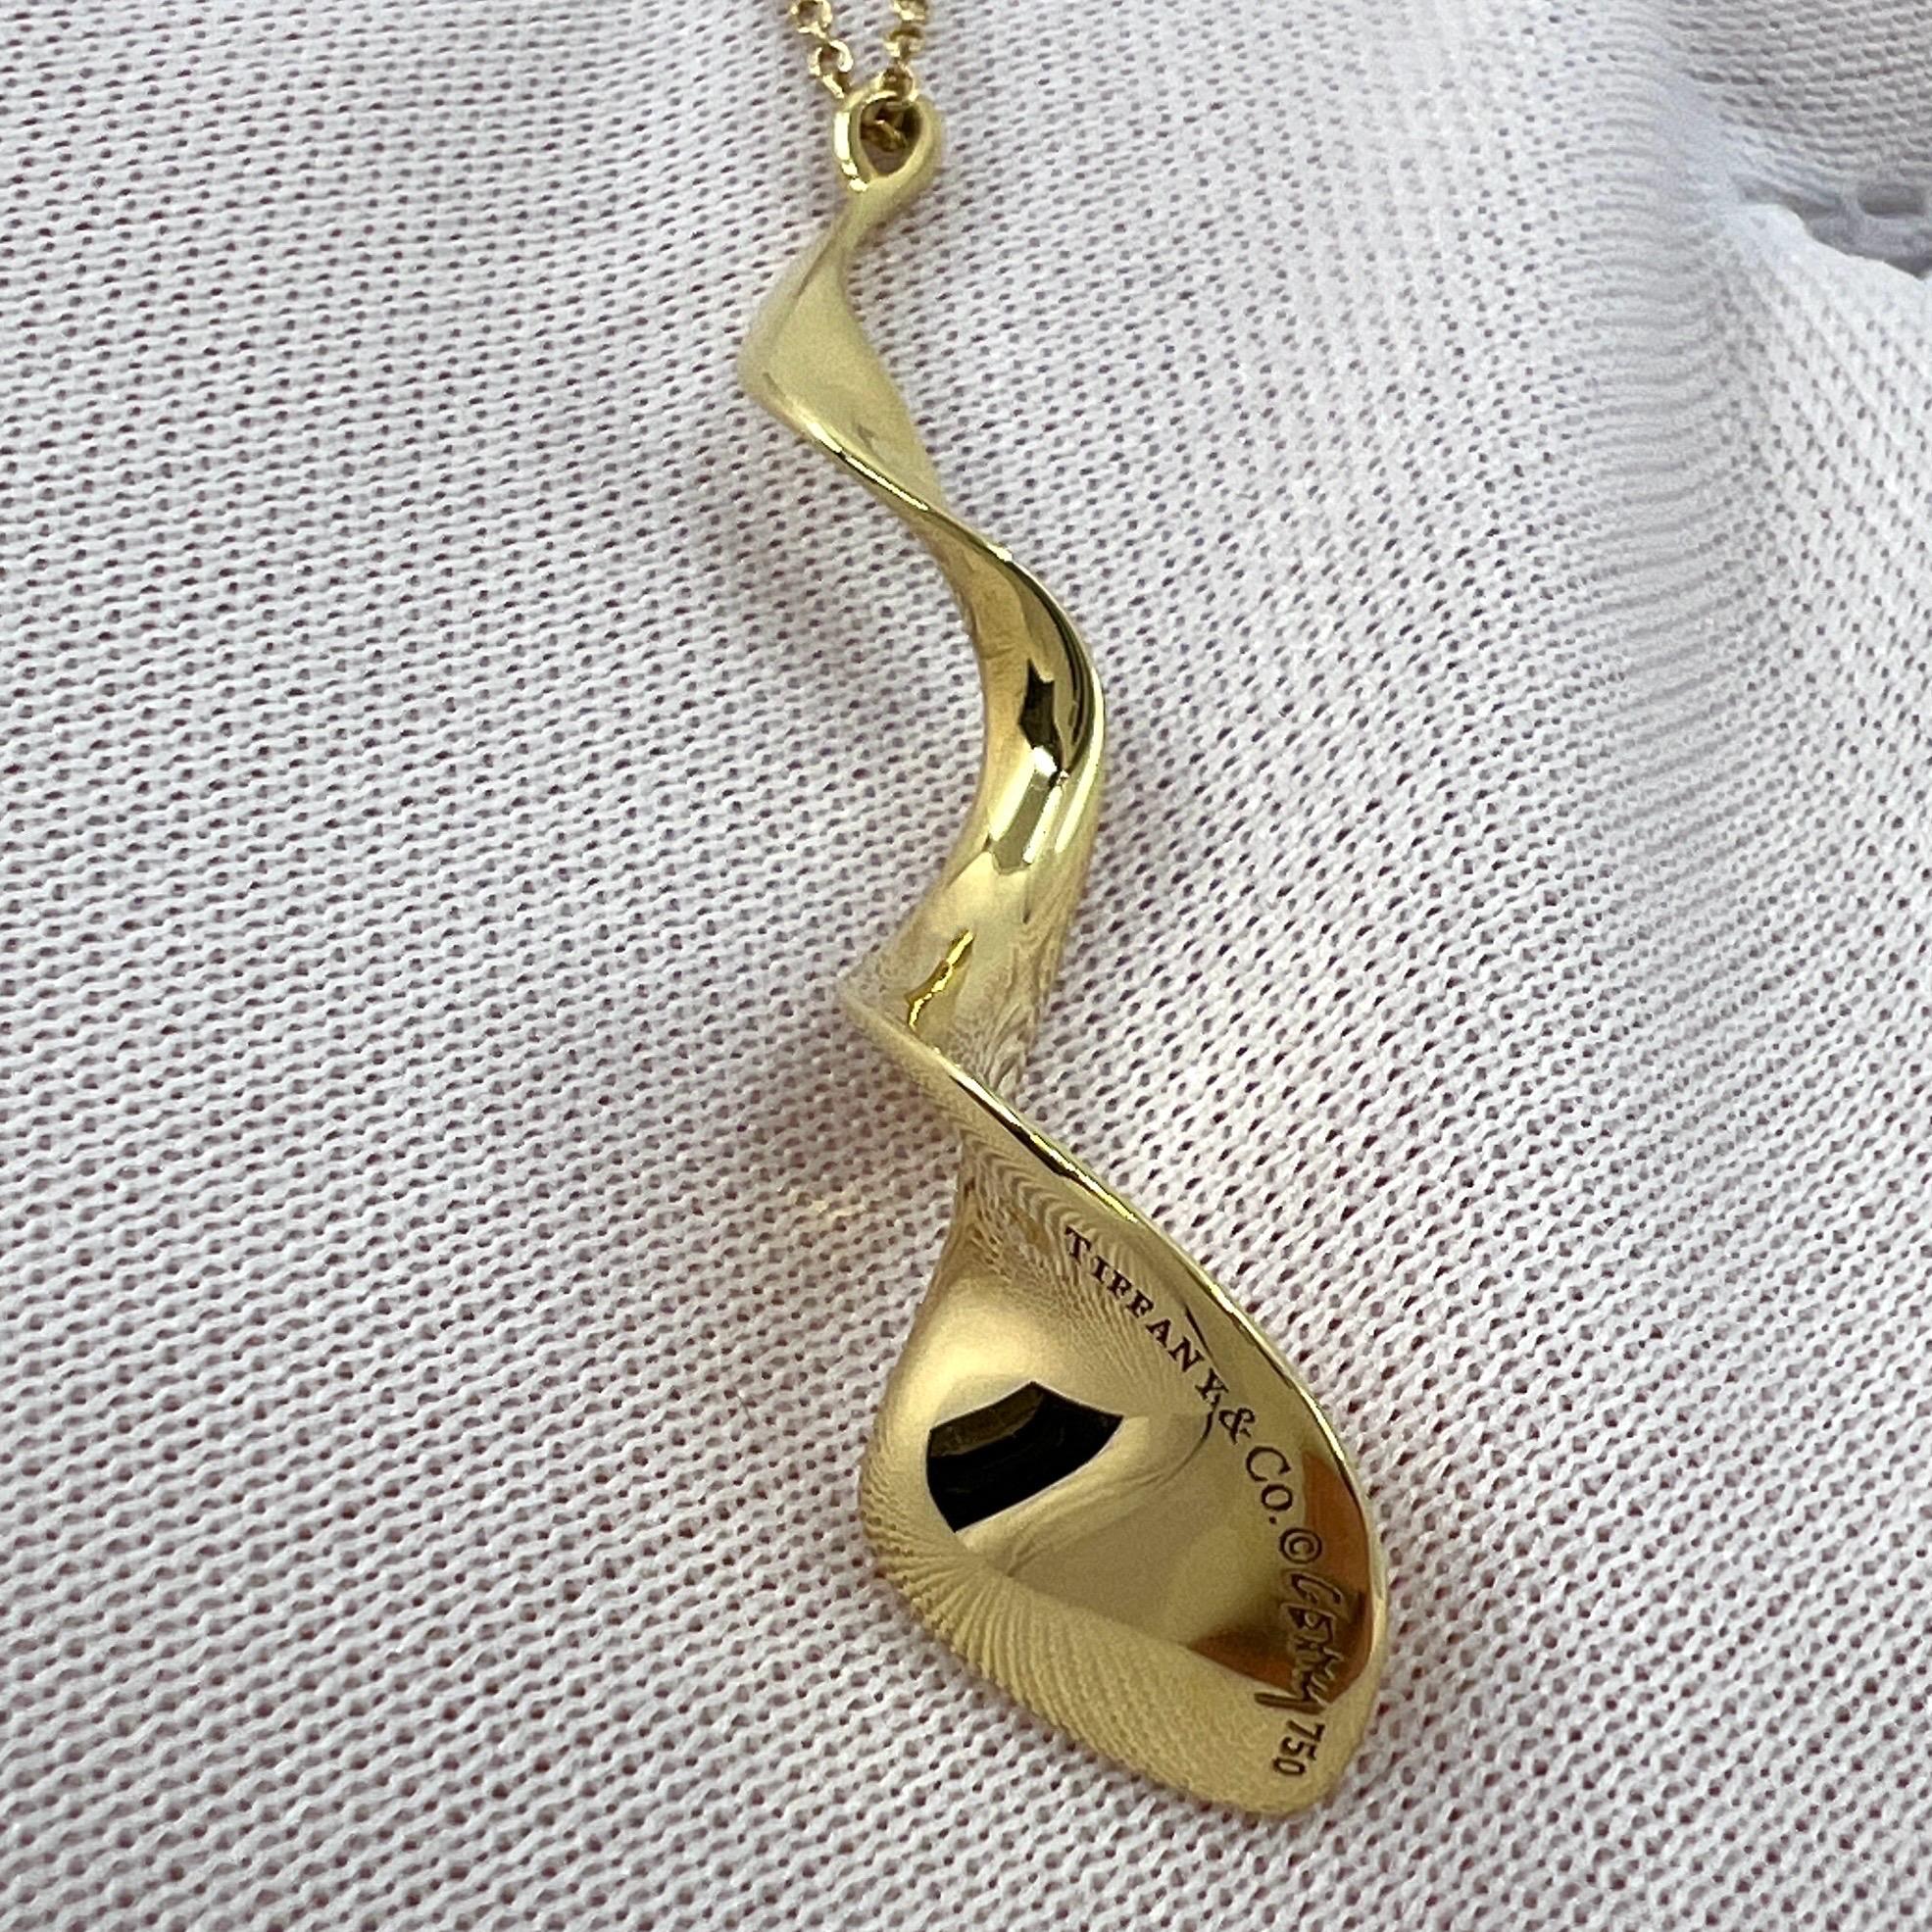 Tiffany & Co Frank Gehry 18k Yellow Gold Orchid Twist Spiral Pendant Necklace For Sale 1